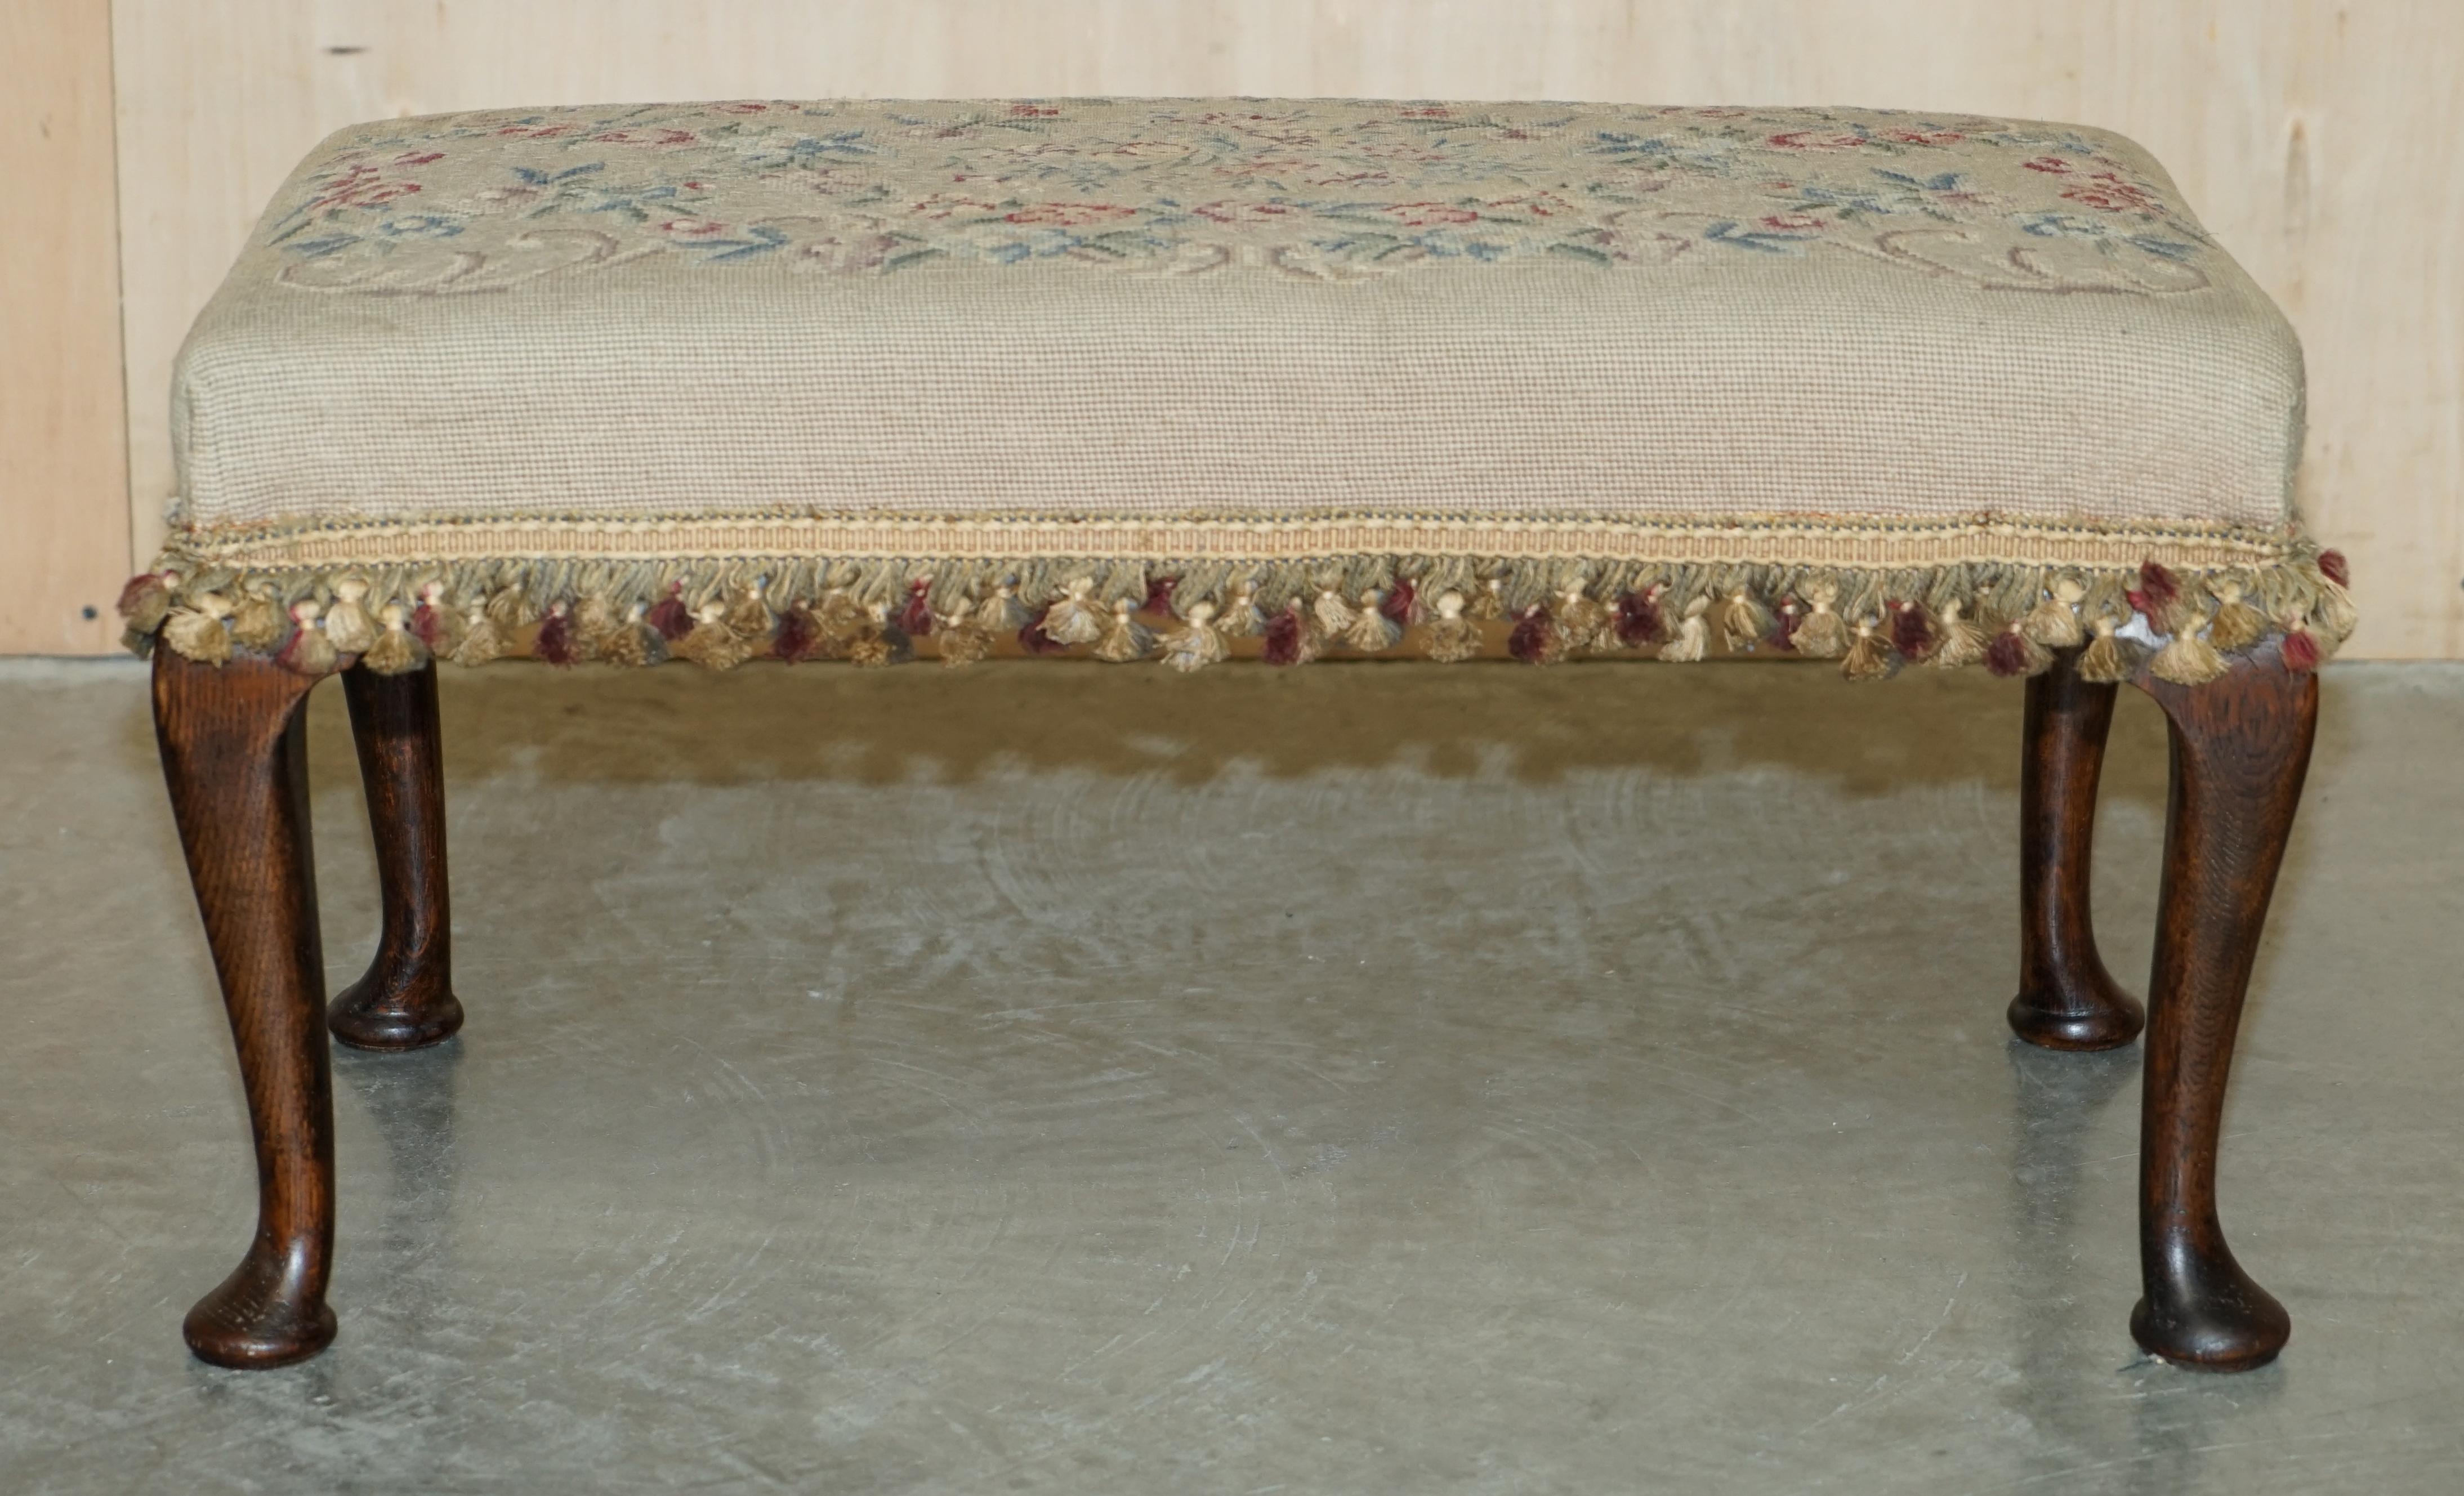 We are delighted to offer for sale this lovely original Victorian circa 1880 hand carved oak Cabriolet legged footstool with floral embroidered upholstery 

A very decorative and well made piece, the top has a period Victorian embroidery of